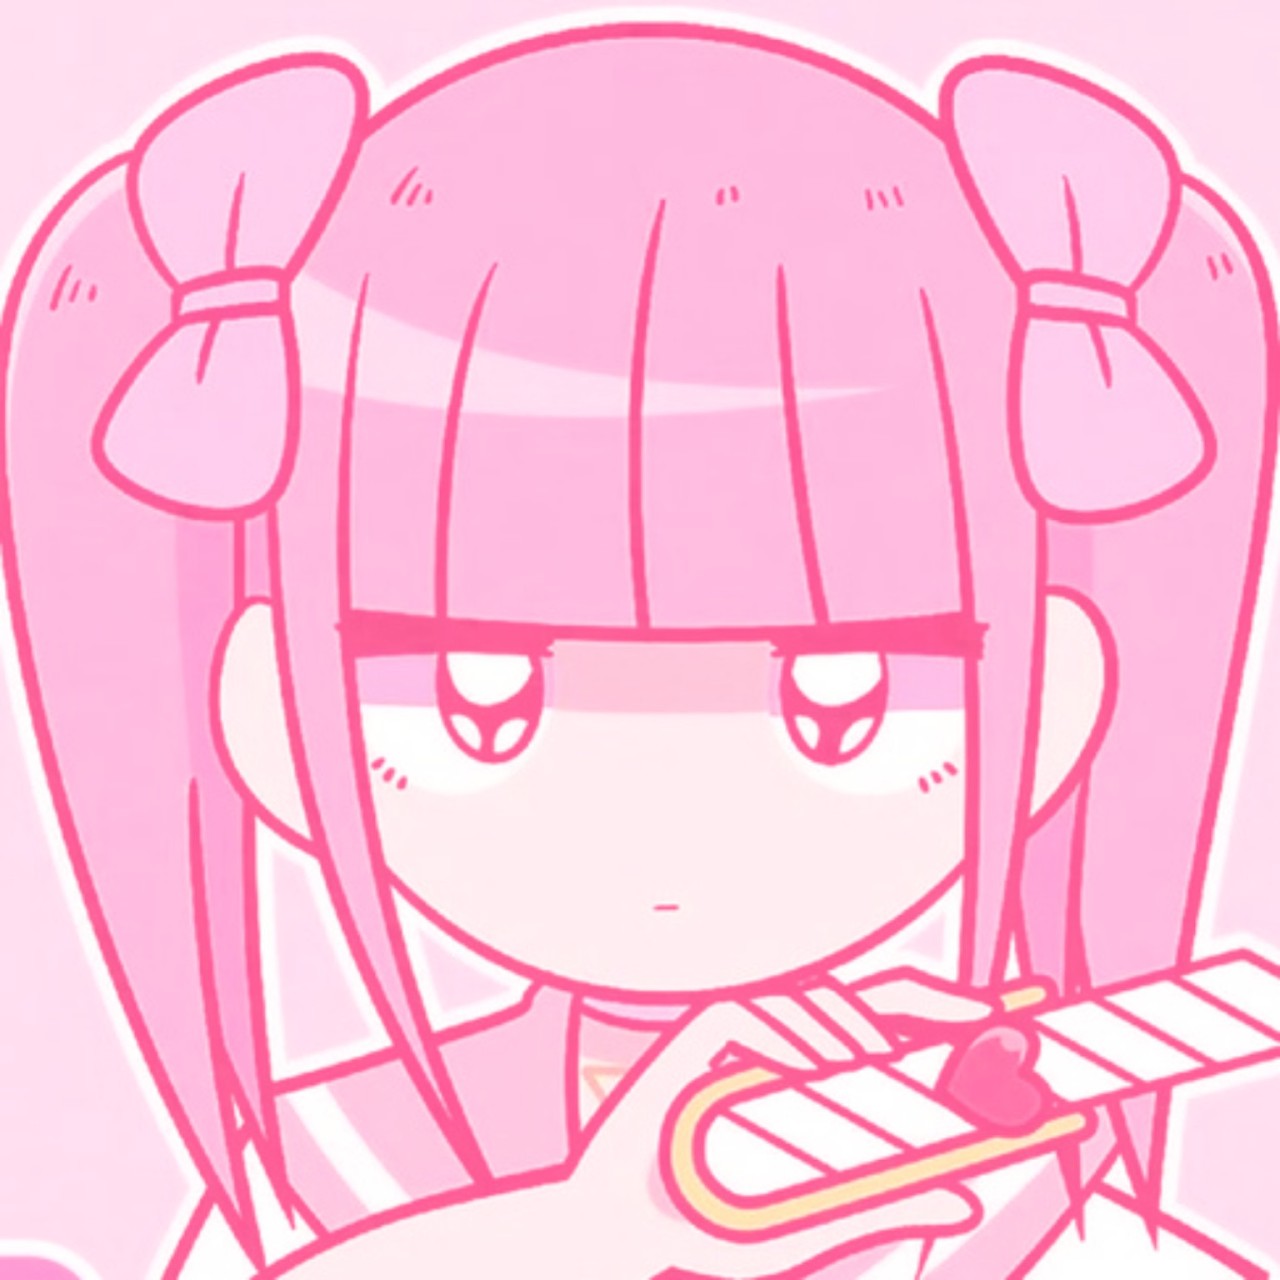 It S Going To Be Okay 9 Pink Menhera Chan Icons Inspired By The Ones By Menhera (メンヘラ)* is an abbreviation of mental healther, a name given to the members of the mental health community, and refers to a subculture centered around a certain style of vent art and. 9 pink menhera chan icons inspired by